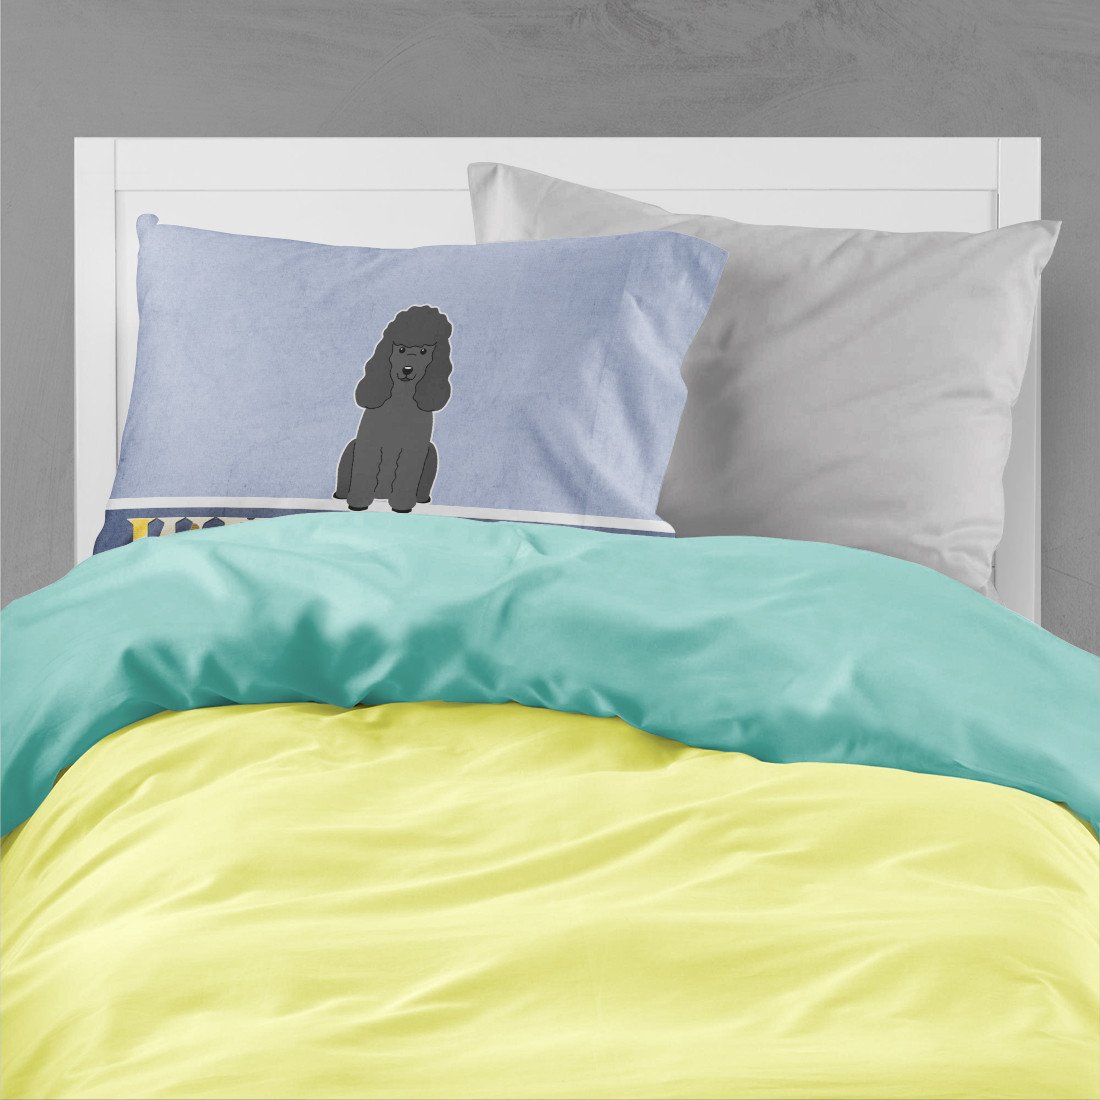 Poodle Black Welcome Fabric Standard Pillowcase BB5652PILLOWCASE by Caroline's Treasures